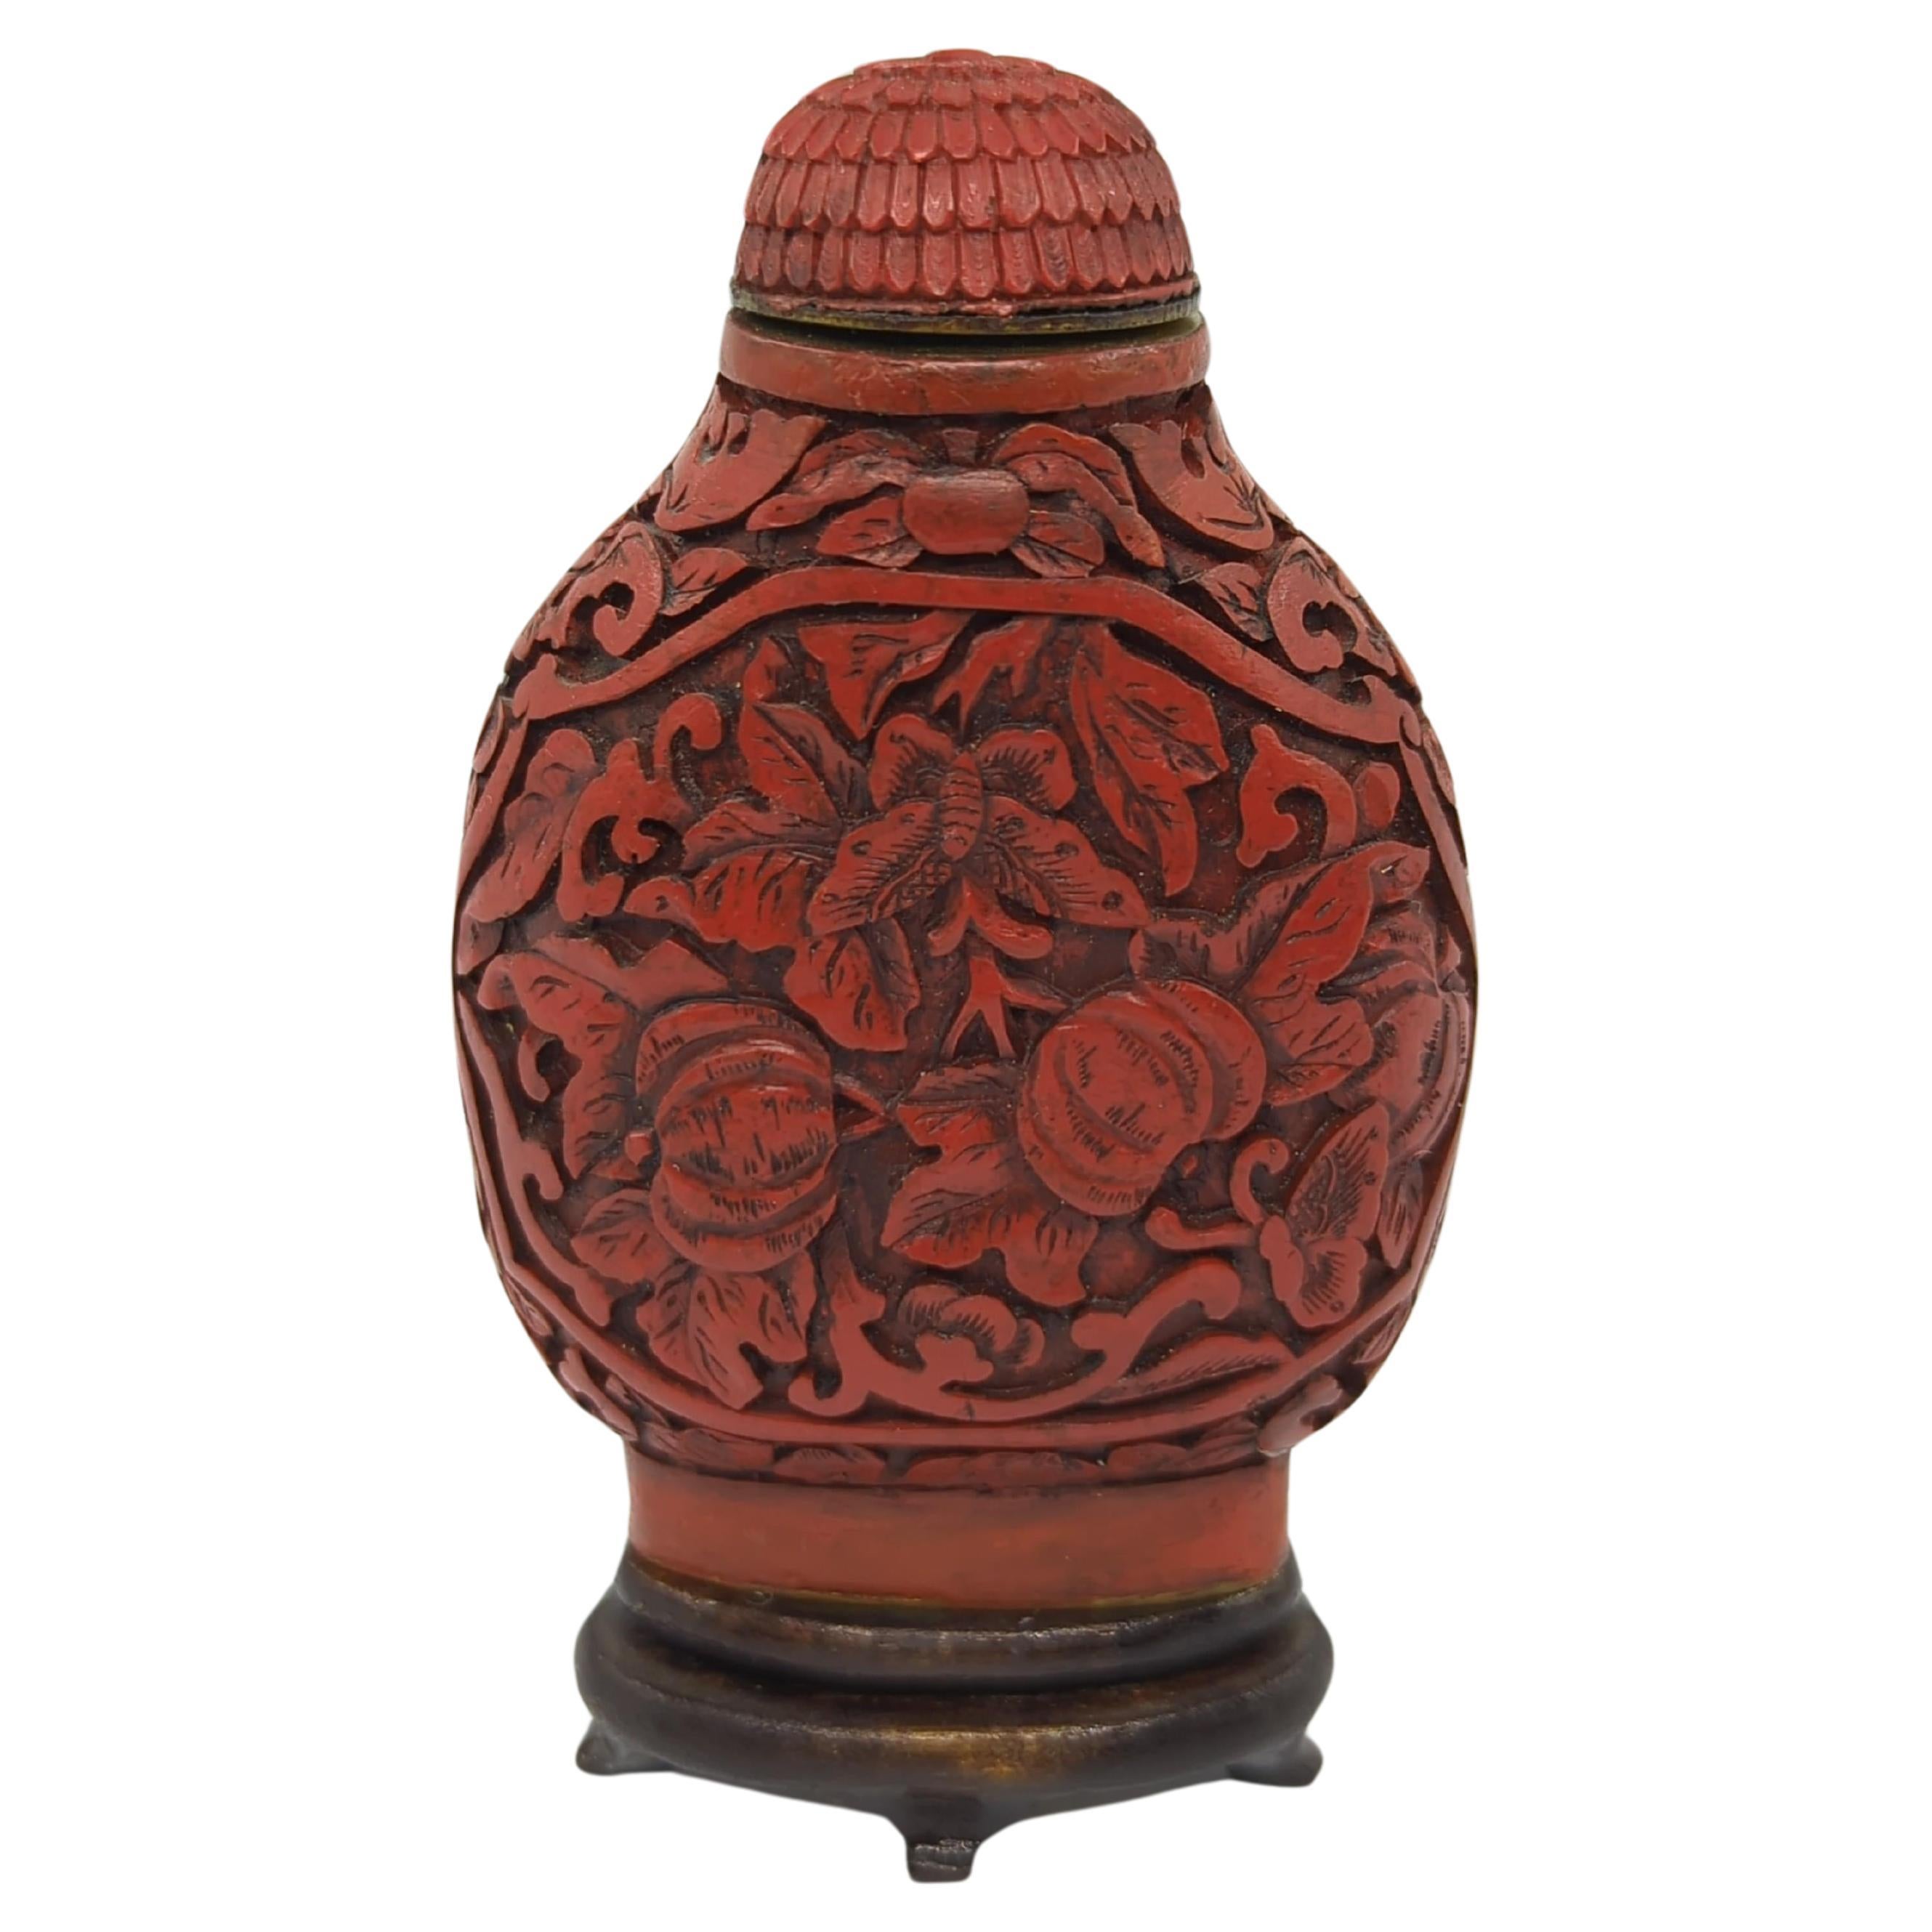 Antique Chinese Carved Cinnabar Lacquer Snuff Bottle Melons 19c Qing Daoguang Mk